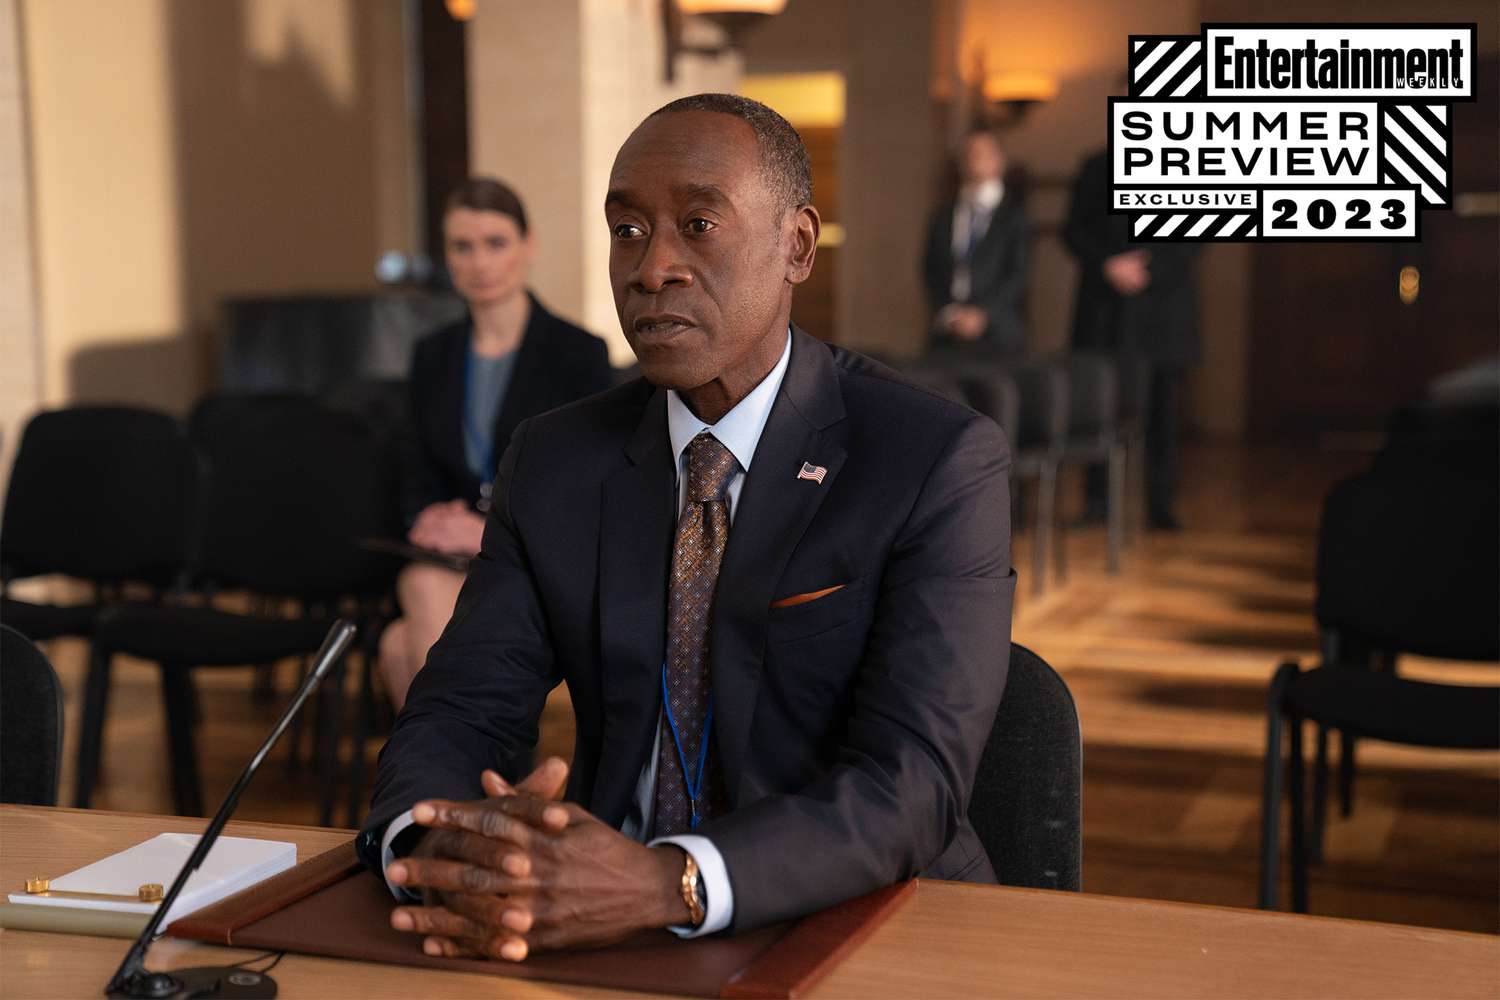 Don Cheadle finally acts with Samuel L. Jackson in ‘Secret Invasion’